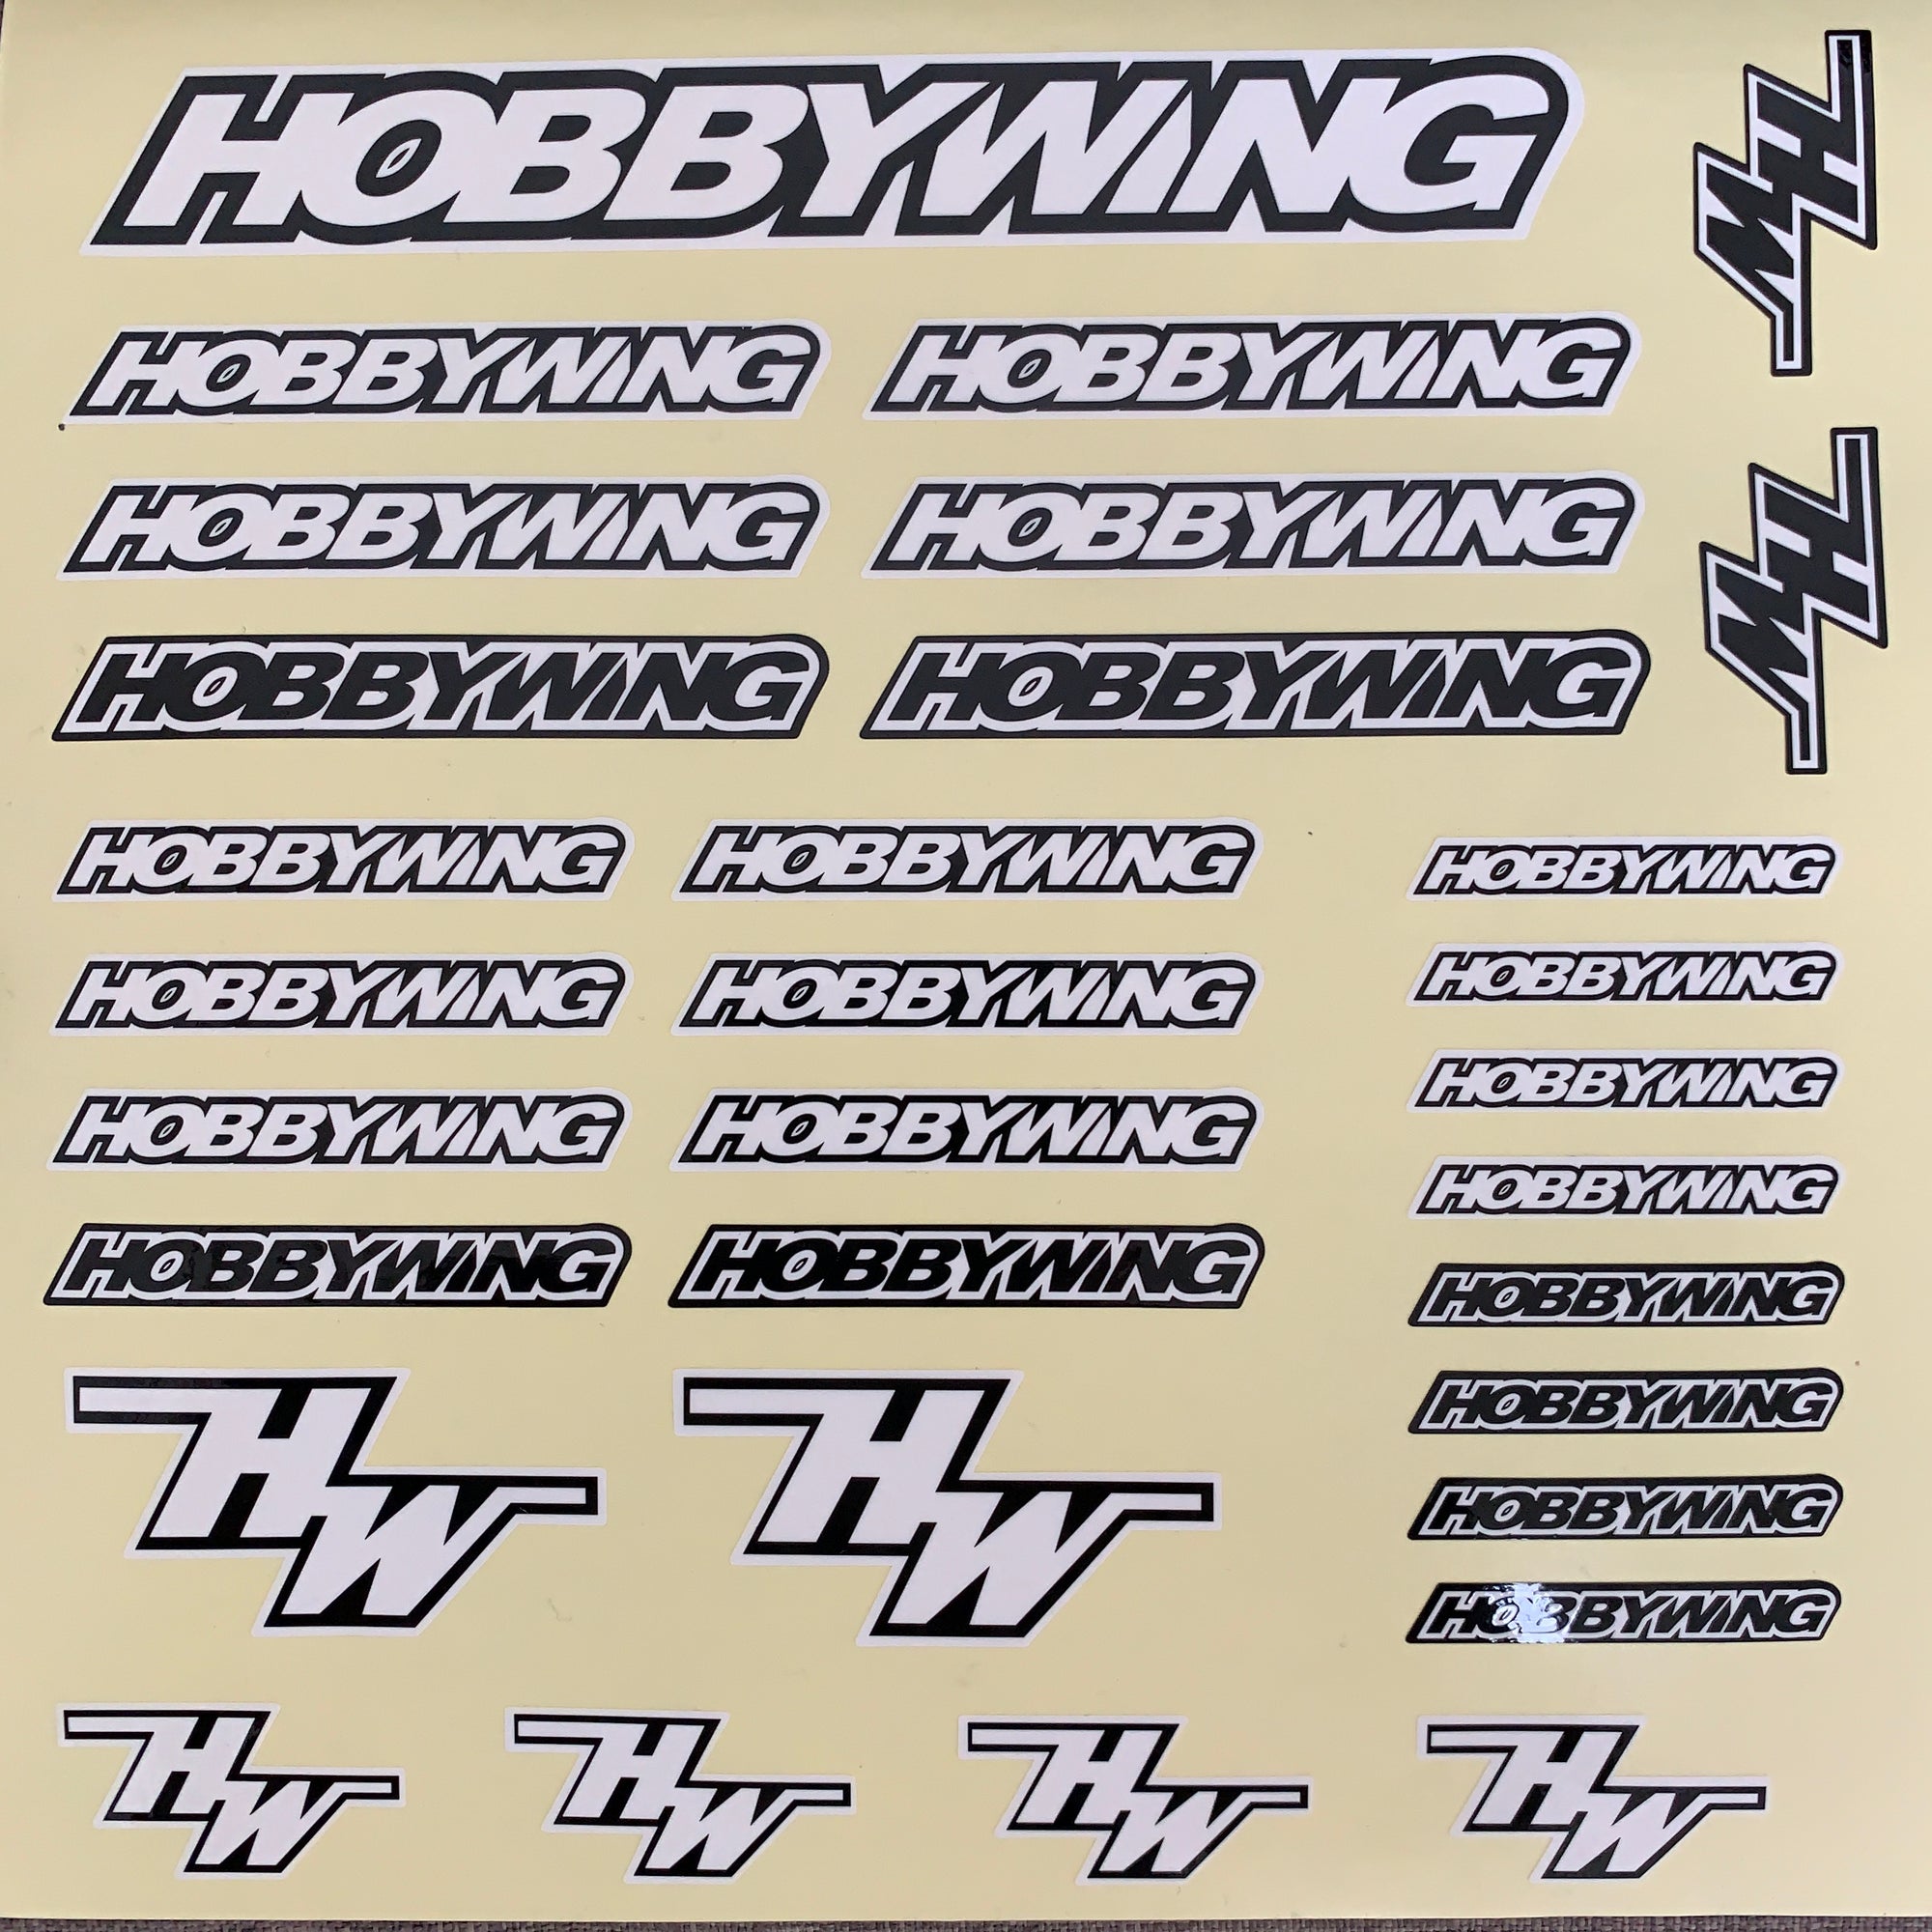 HOBBYWING Official Stickers?